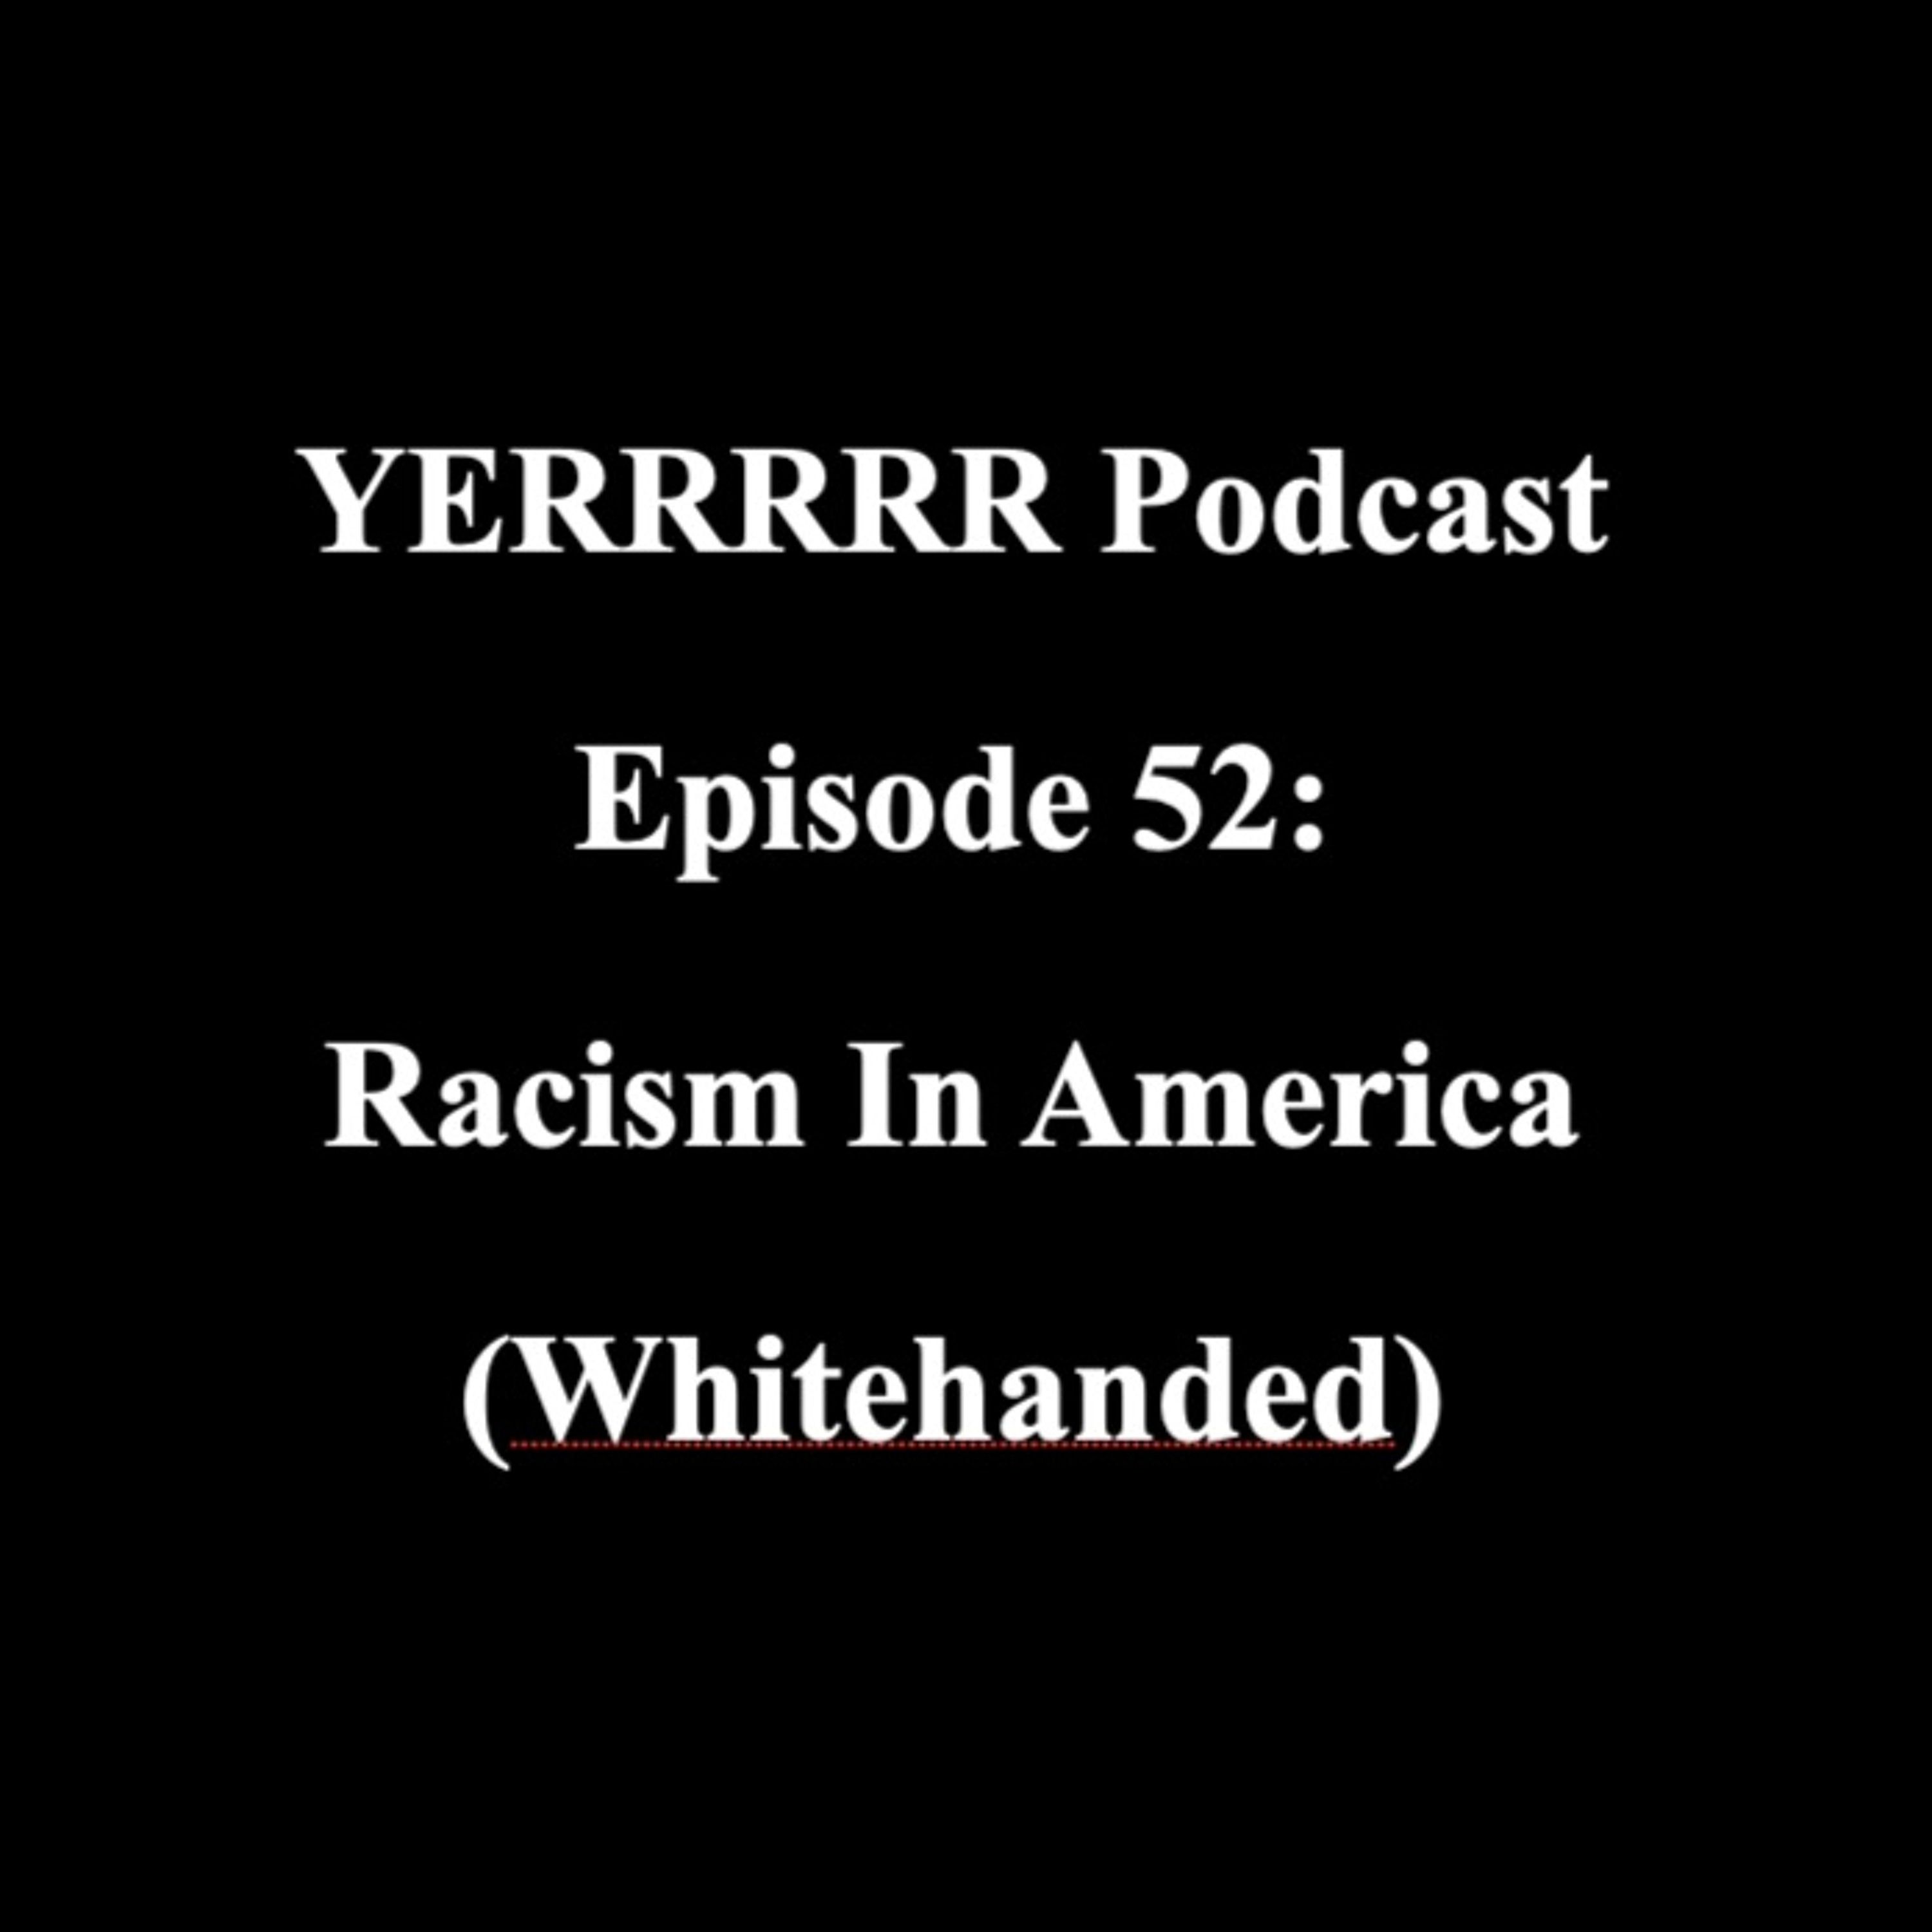 Episode 52: Racism In America (Whitehanded)